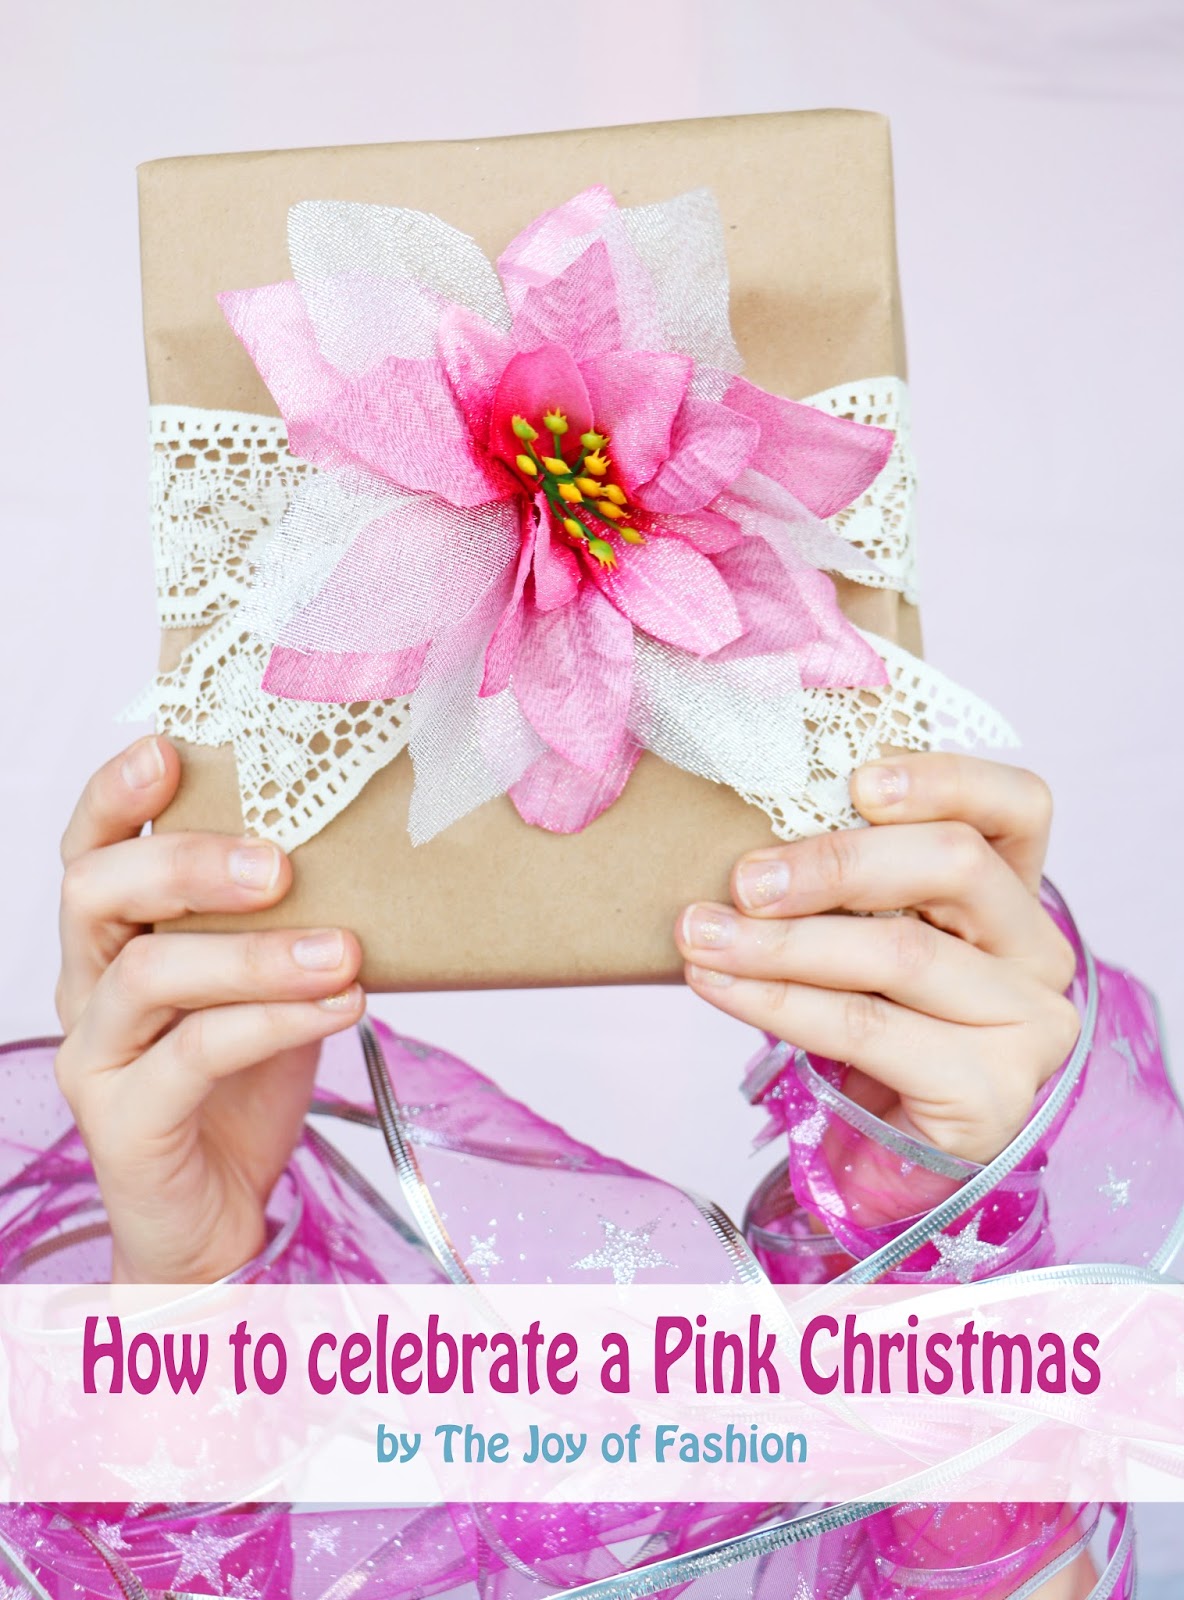 How to celebrate a Pink Christmas